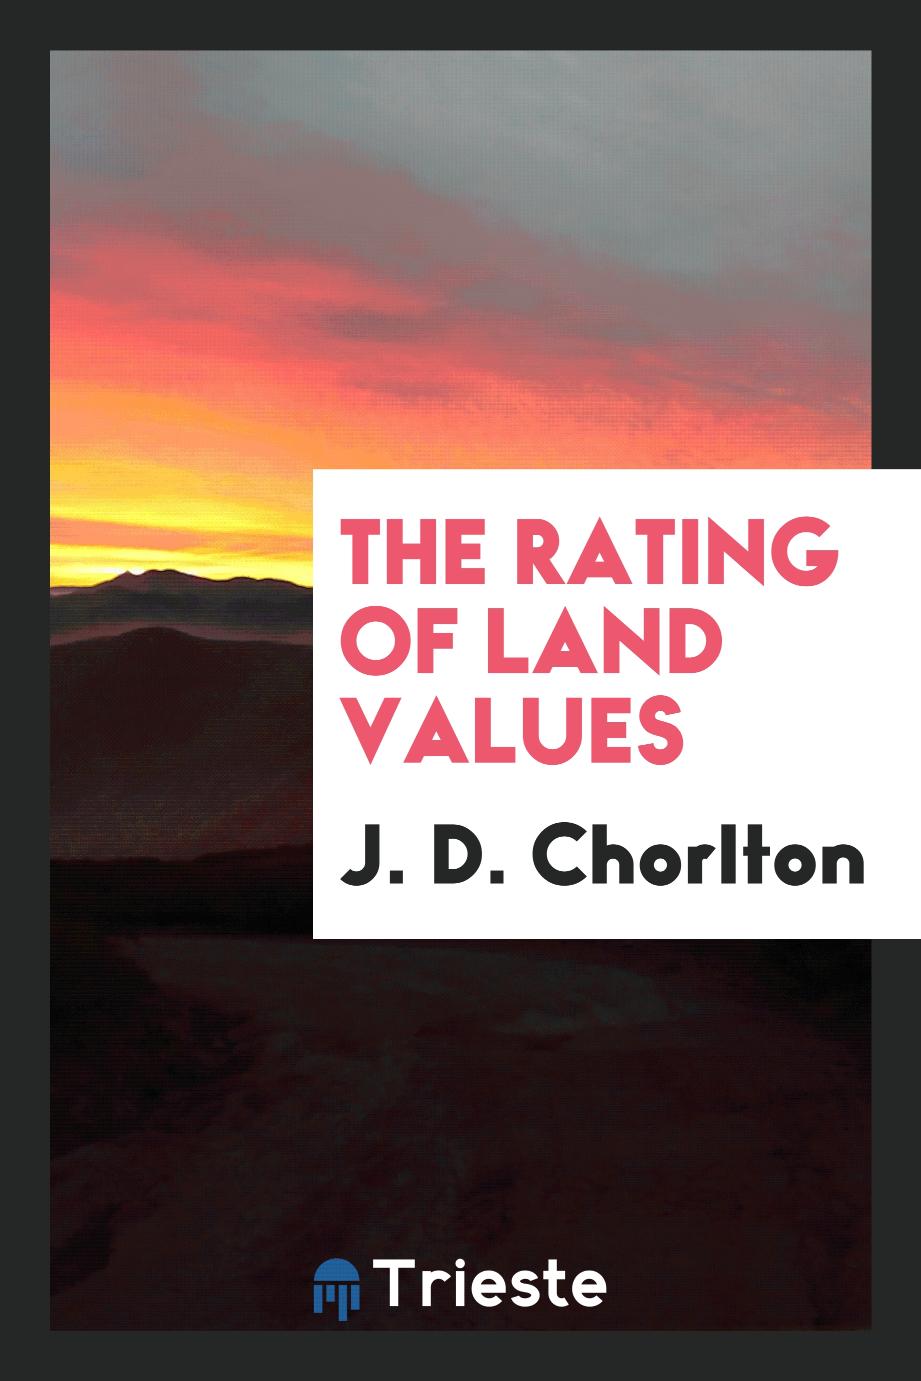 The rating of land values